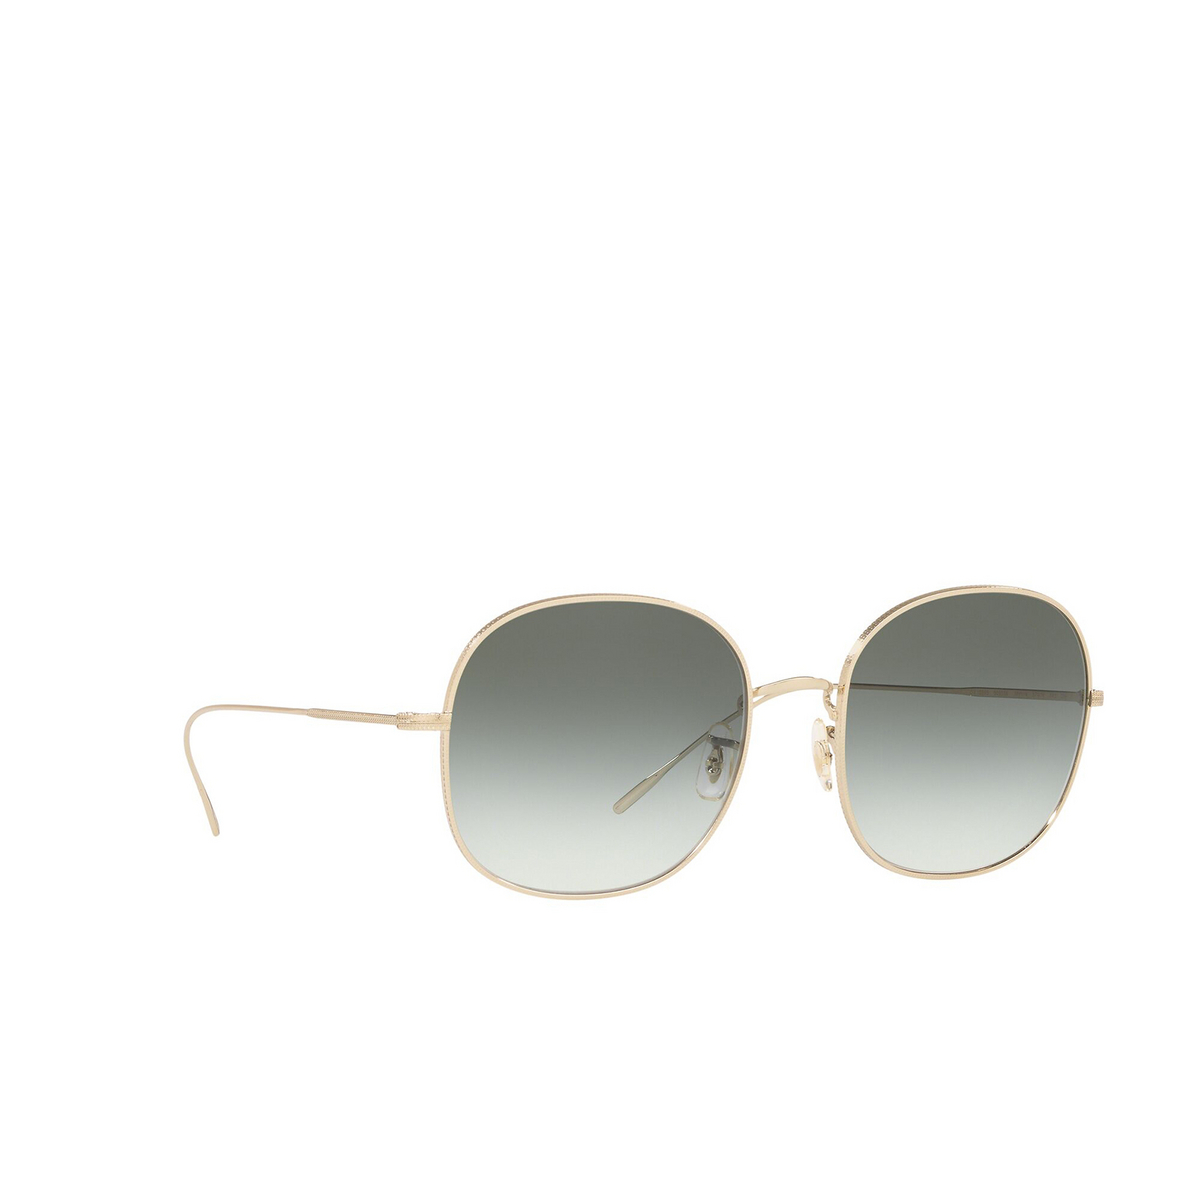 Oliver Peoples® Round Sunglasses: Mehrie OV1255S color Soft Gold 50352A - three-quarters view.